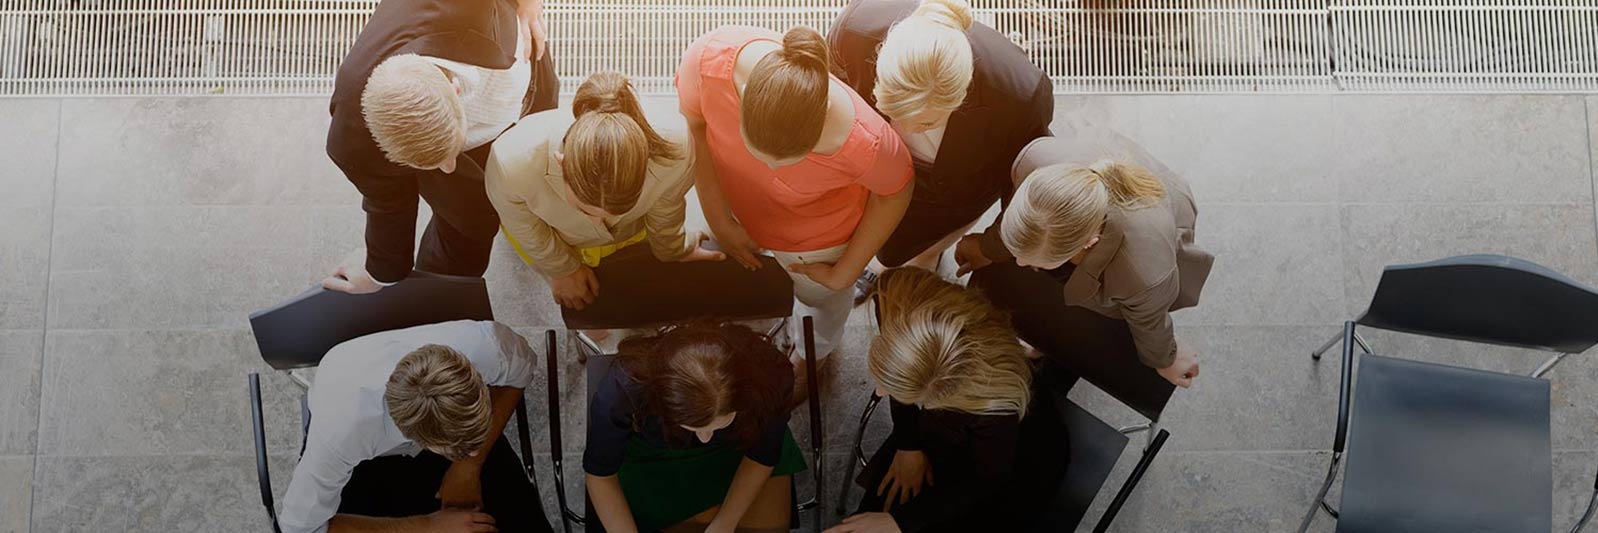 Overhead shot of people having a business meeting